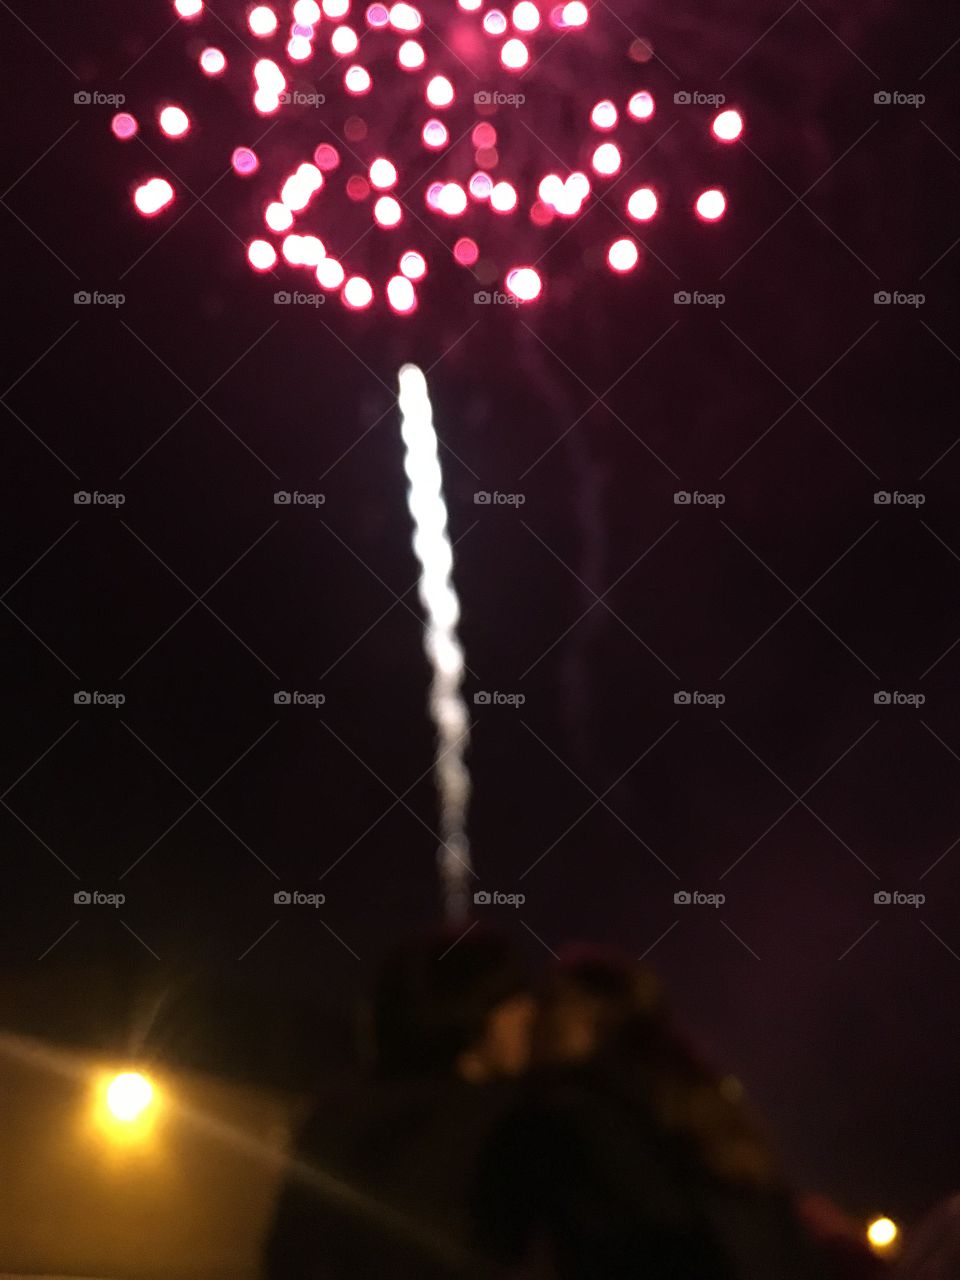 Kiss under the fireworks 